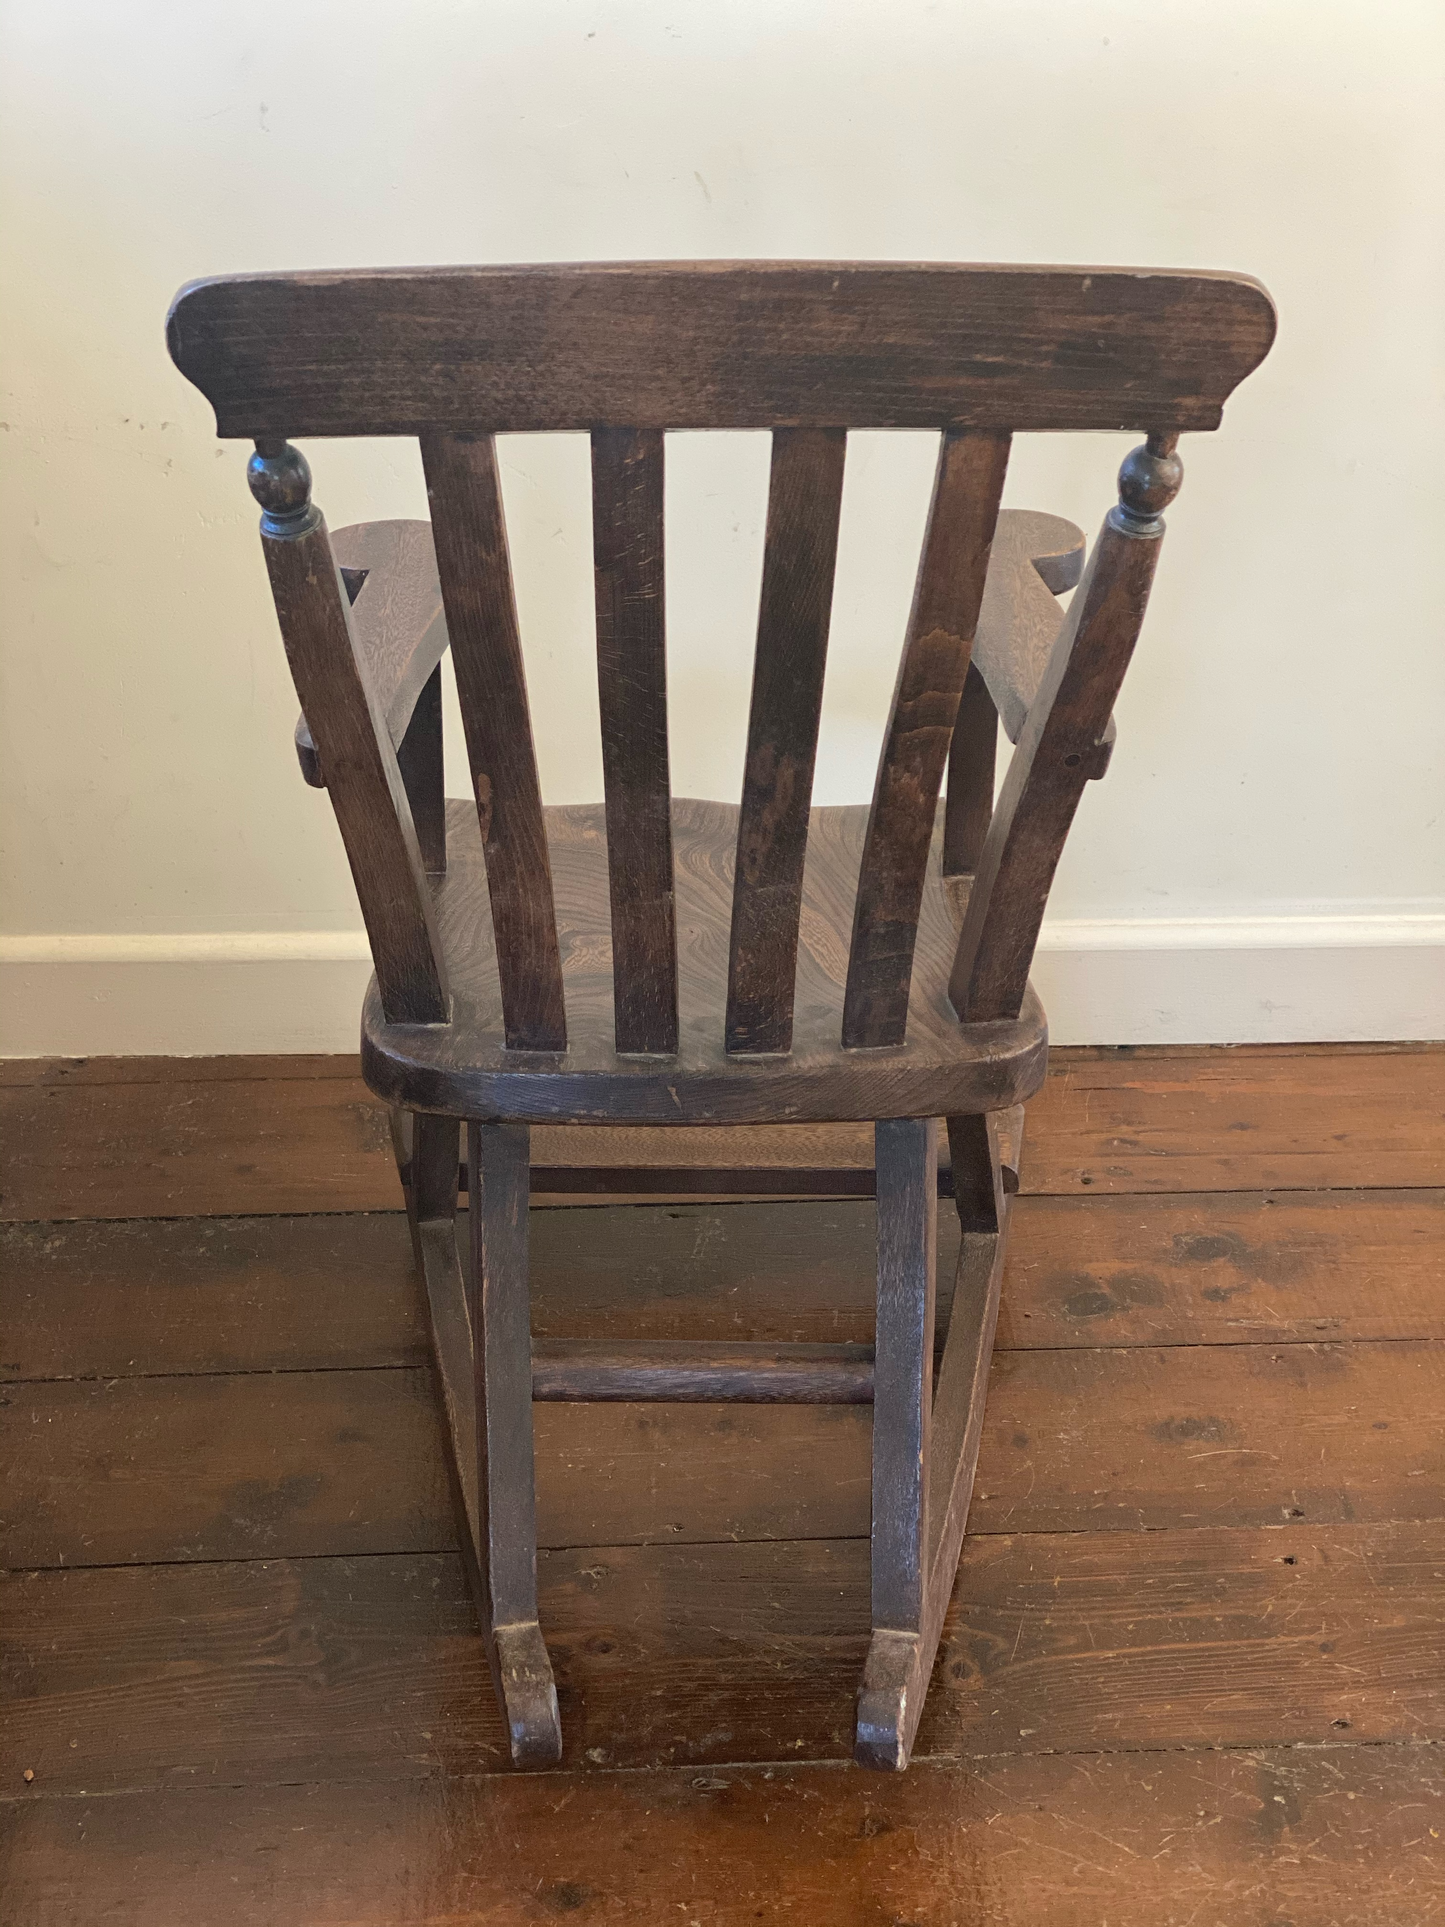 Hand-made Solid Wood Child's Rocking Chair